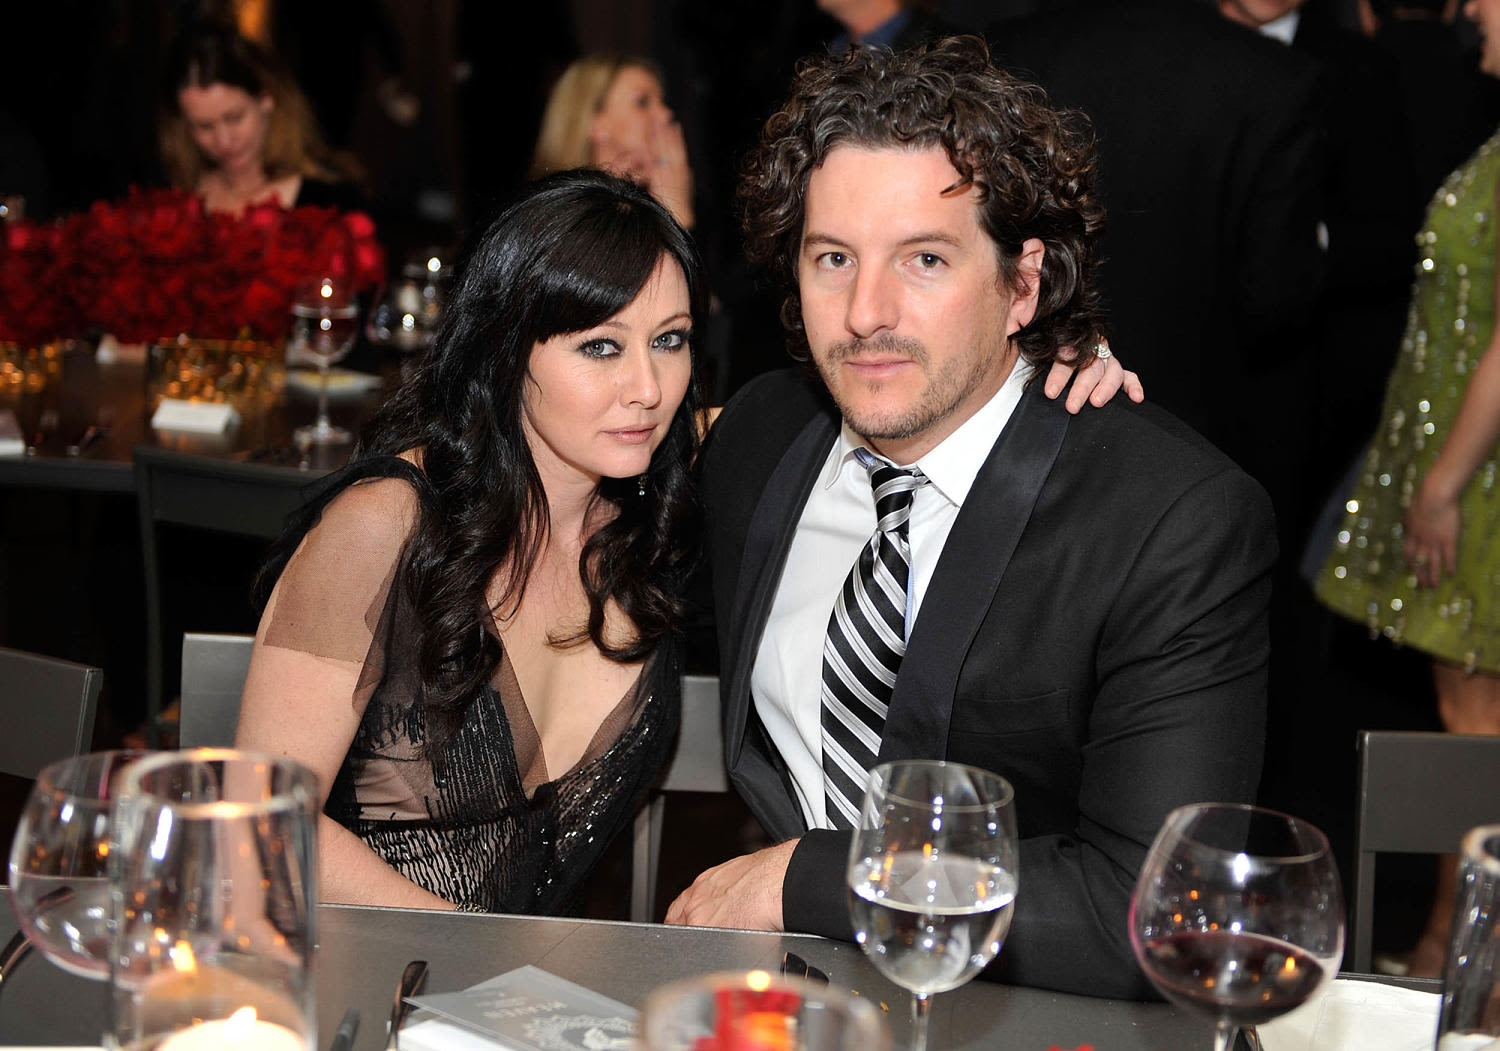 Shannen Doherty settled divorce from ex-husband Kurt Iswarienko 1 day before she died